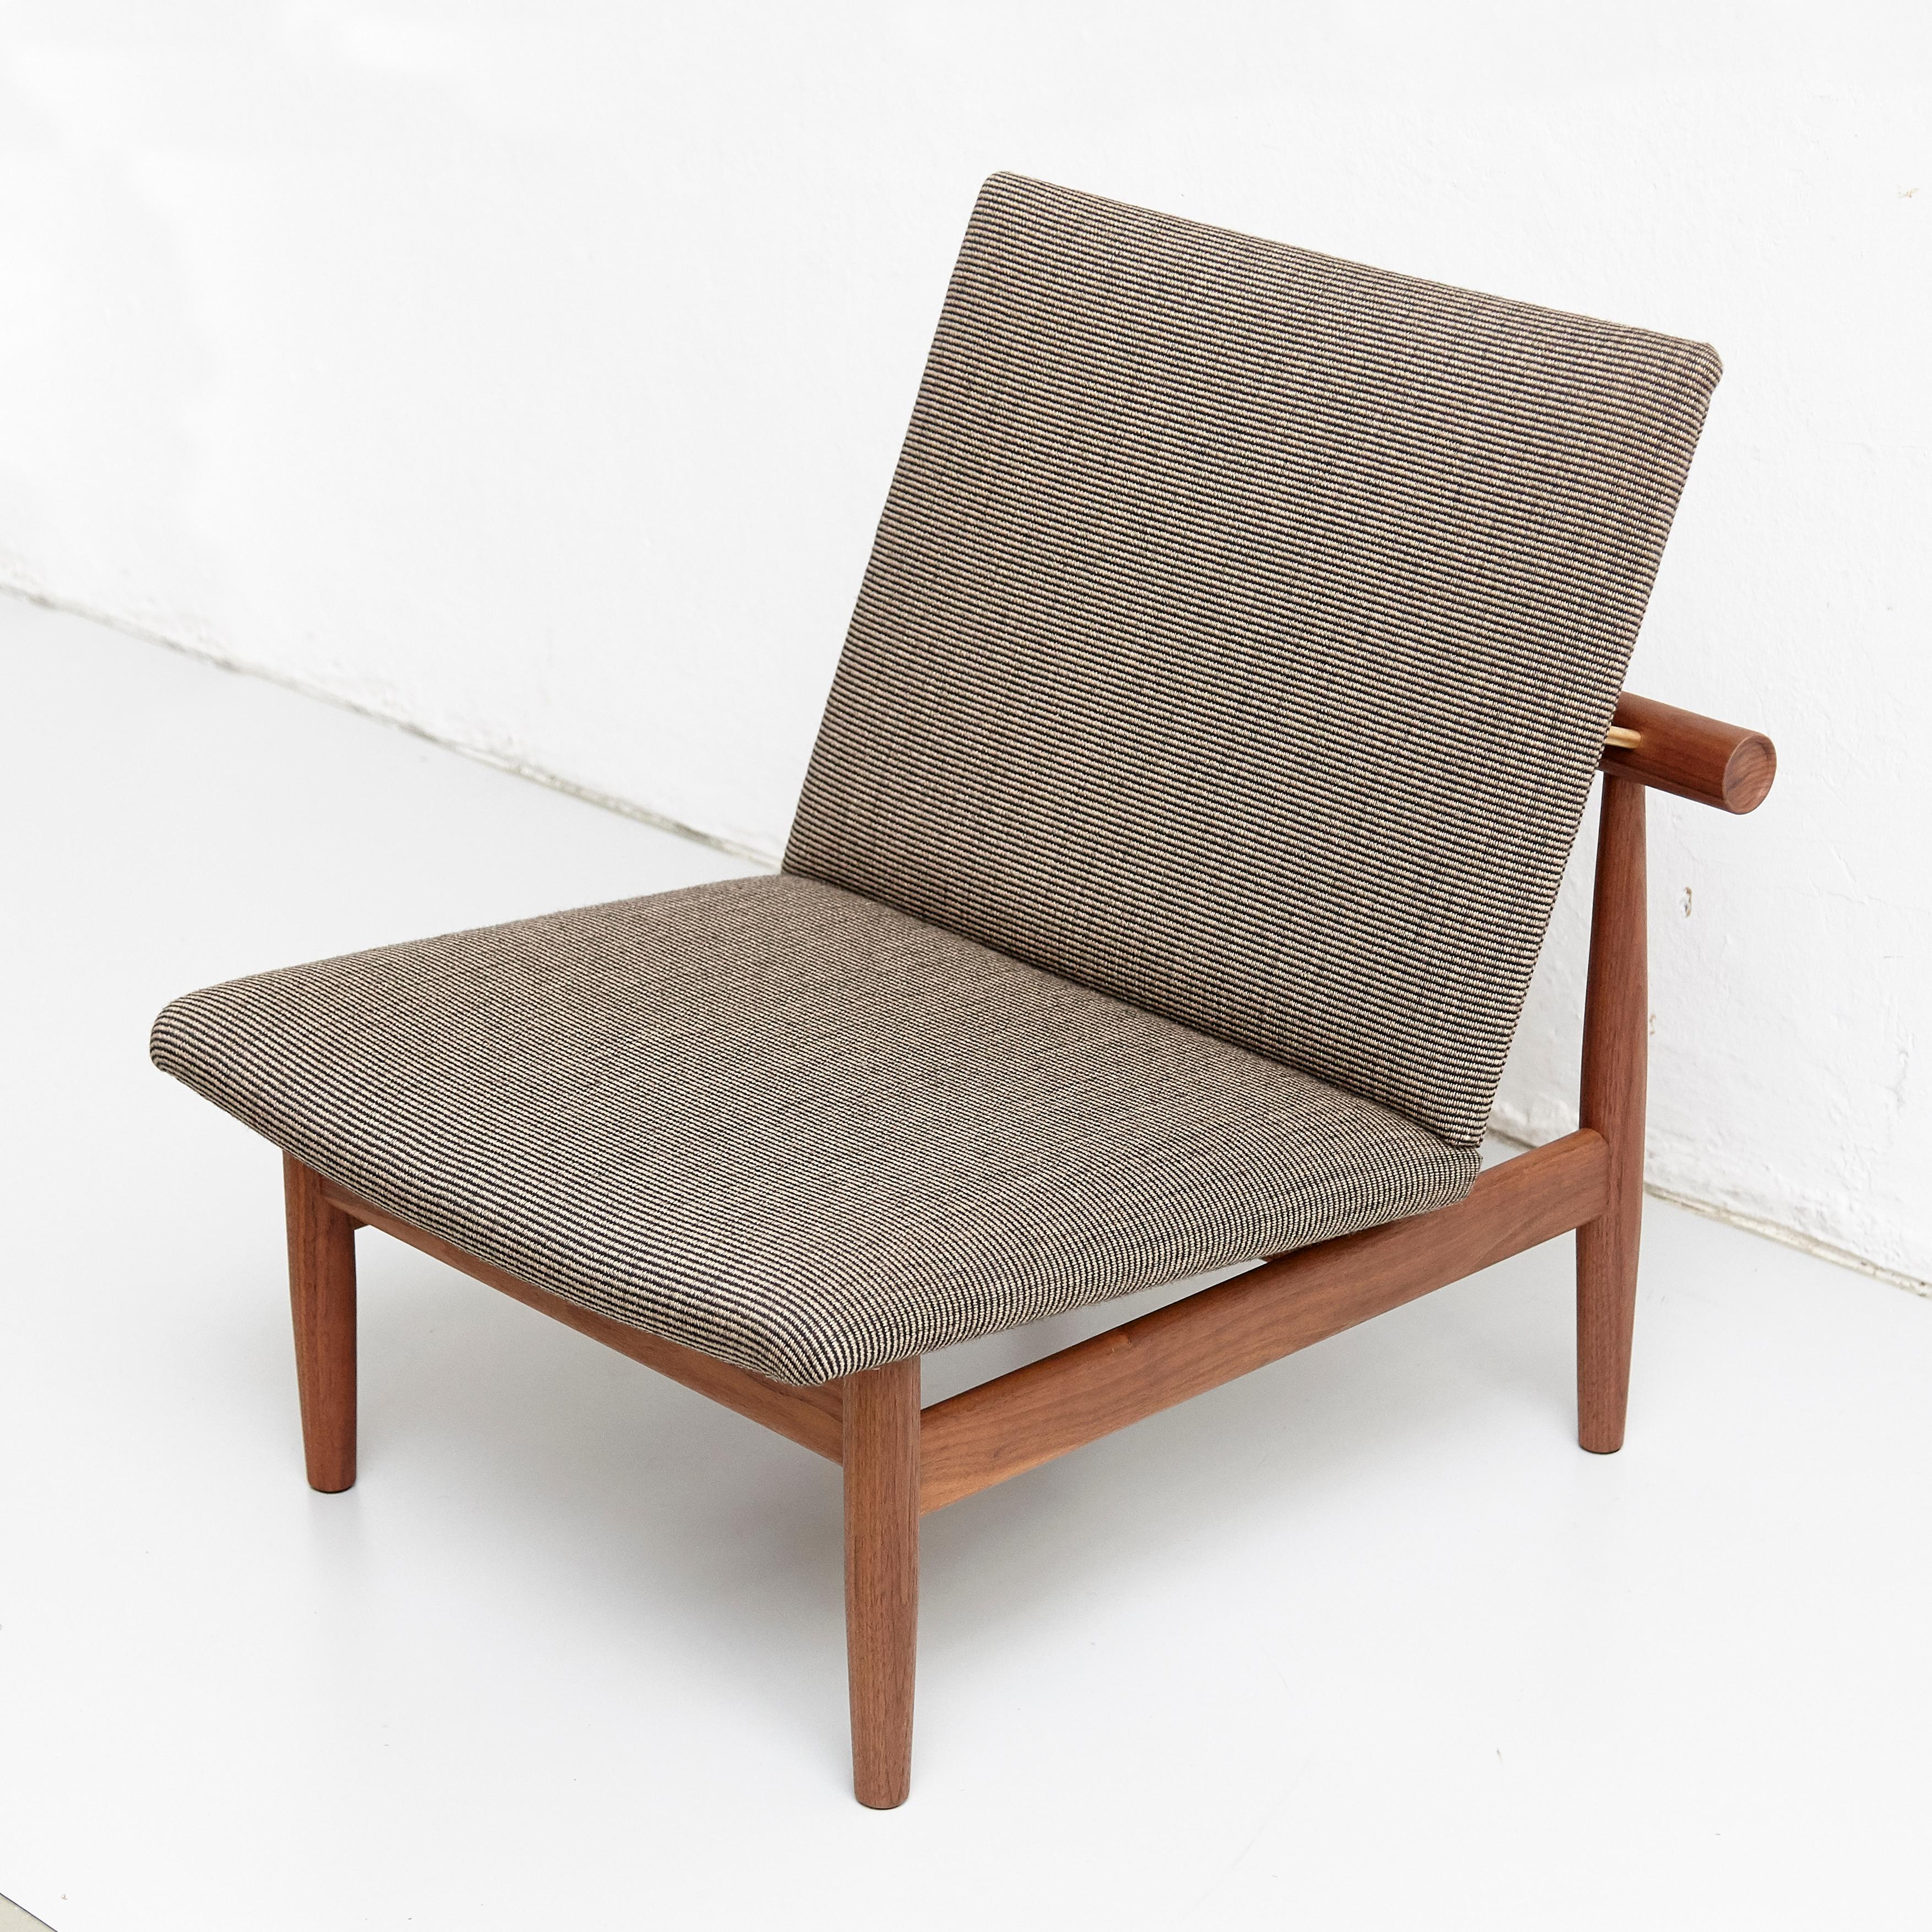 Chair designed by Finn Juhl in 1957, relaunched in 2007.
Manufactured by House of Finn Juhl in Denmark.

Finn Juhl’s partnership with the furniture manufacturer France & Son gave birth to a series of furniture well-suited for industrial